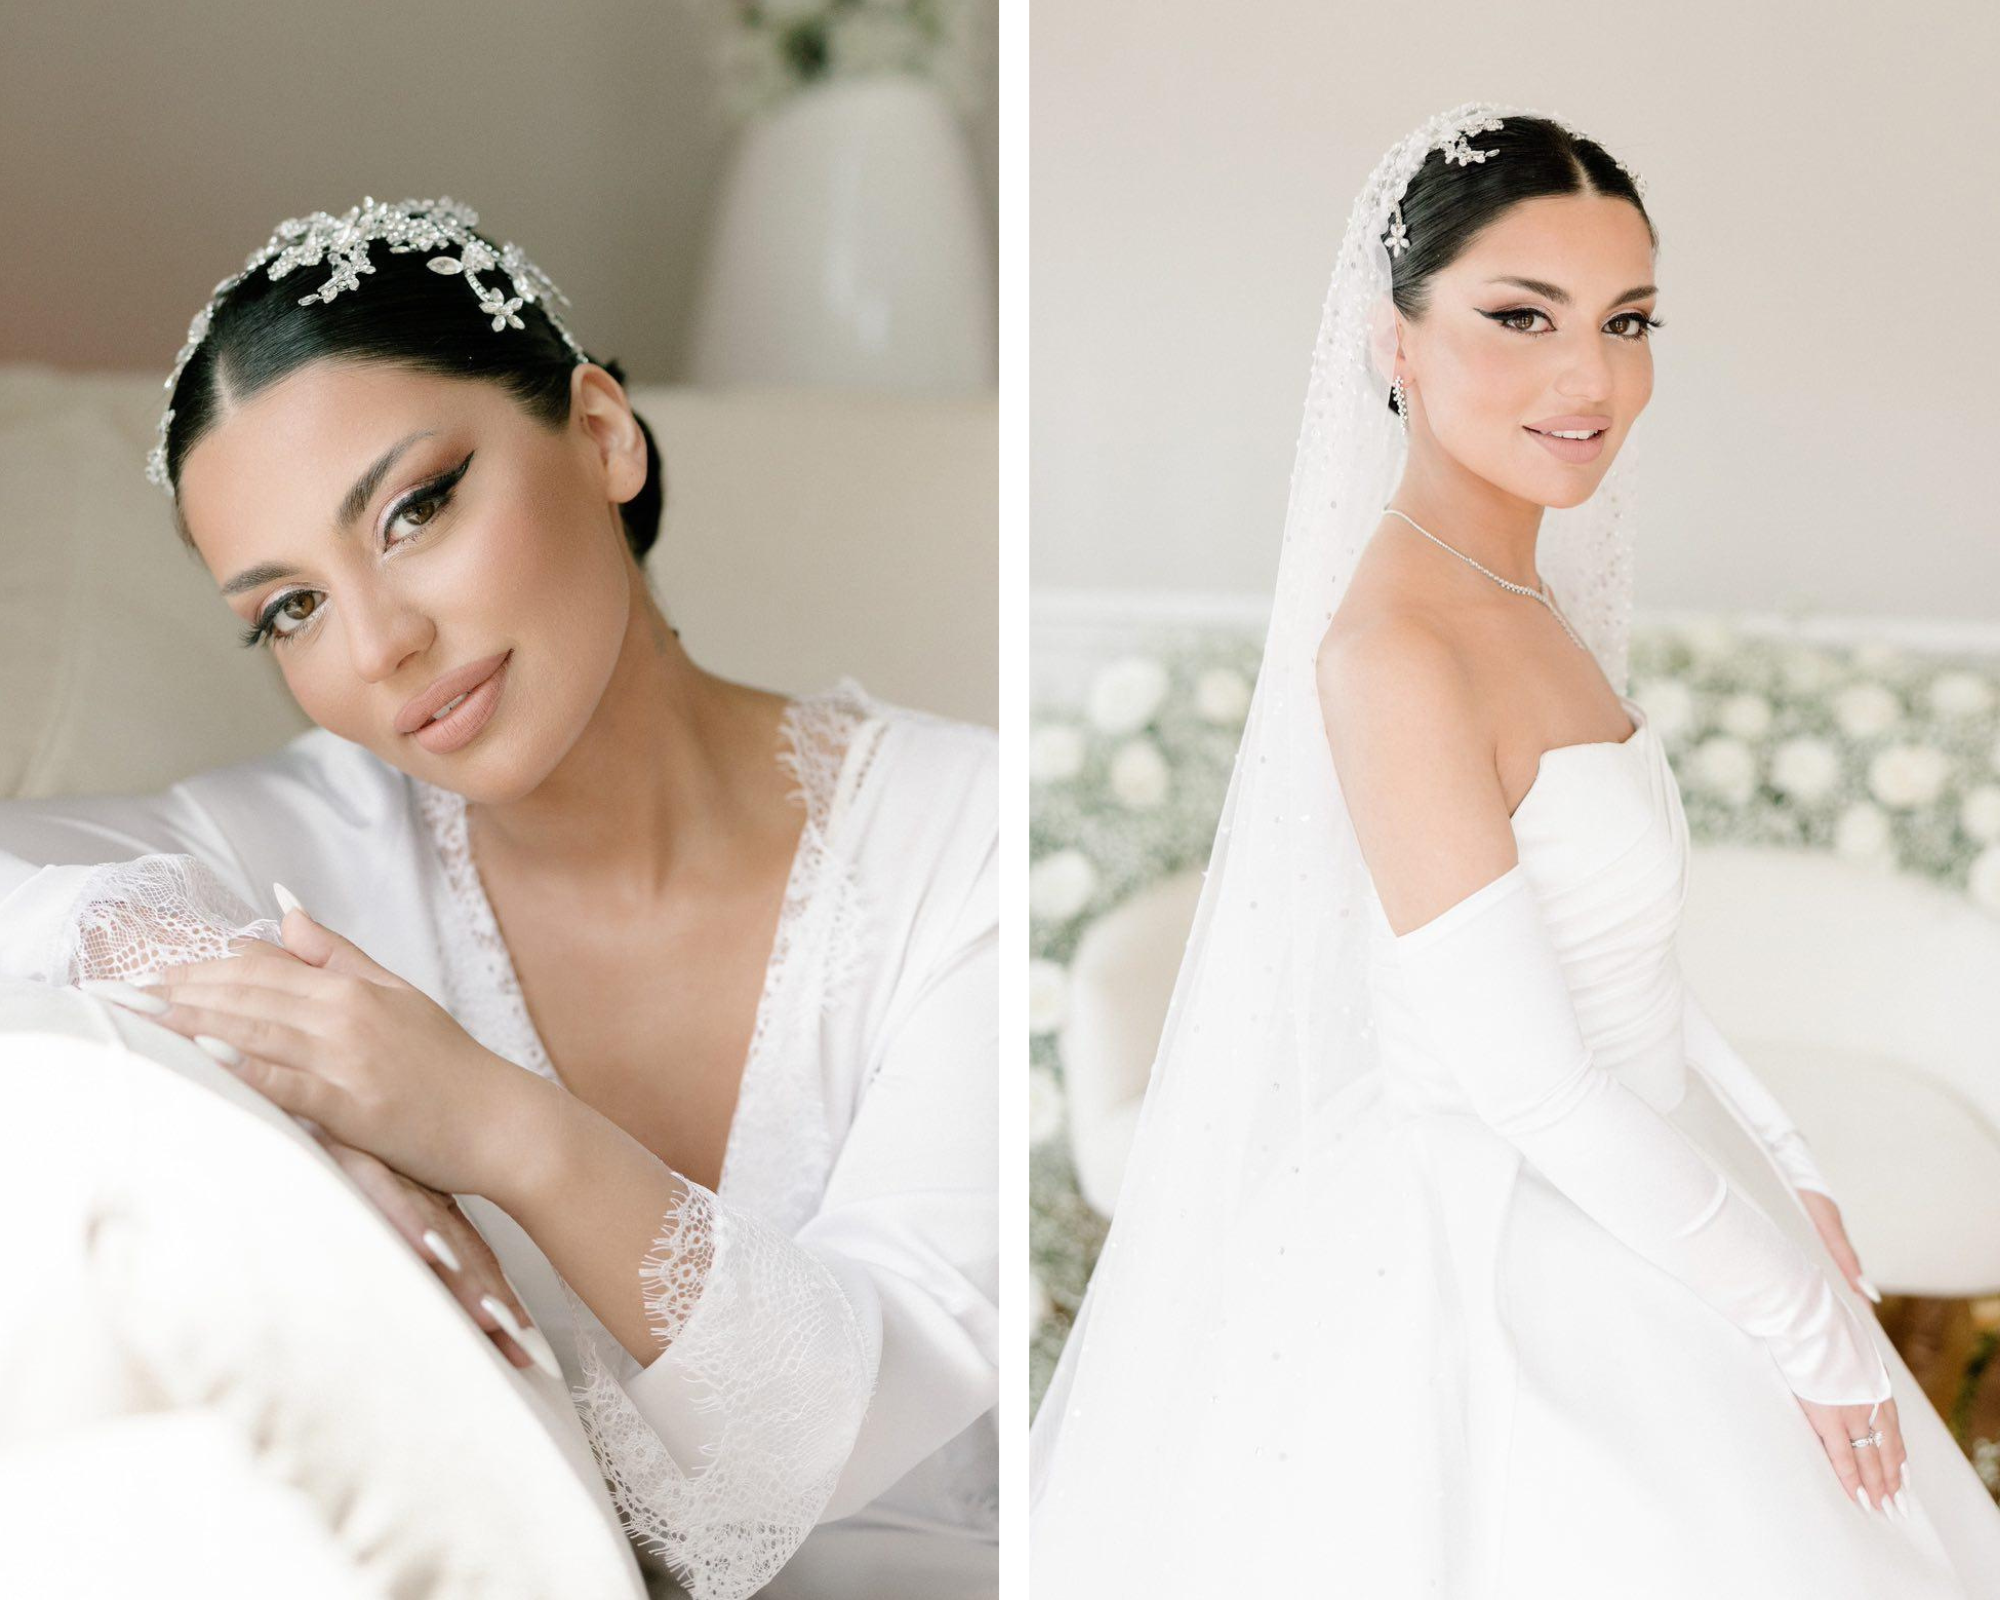  Beautiful bride Valentina wearing her statement floral bridal headpiece encrusted with Swarovski crystals and a stunning ballgown wedding dress. 